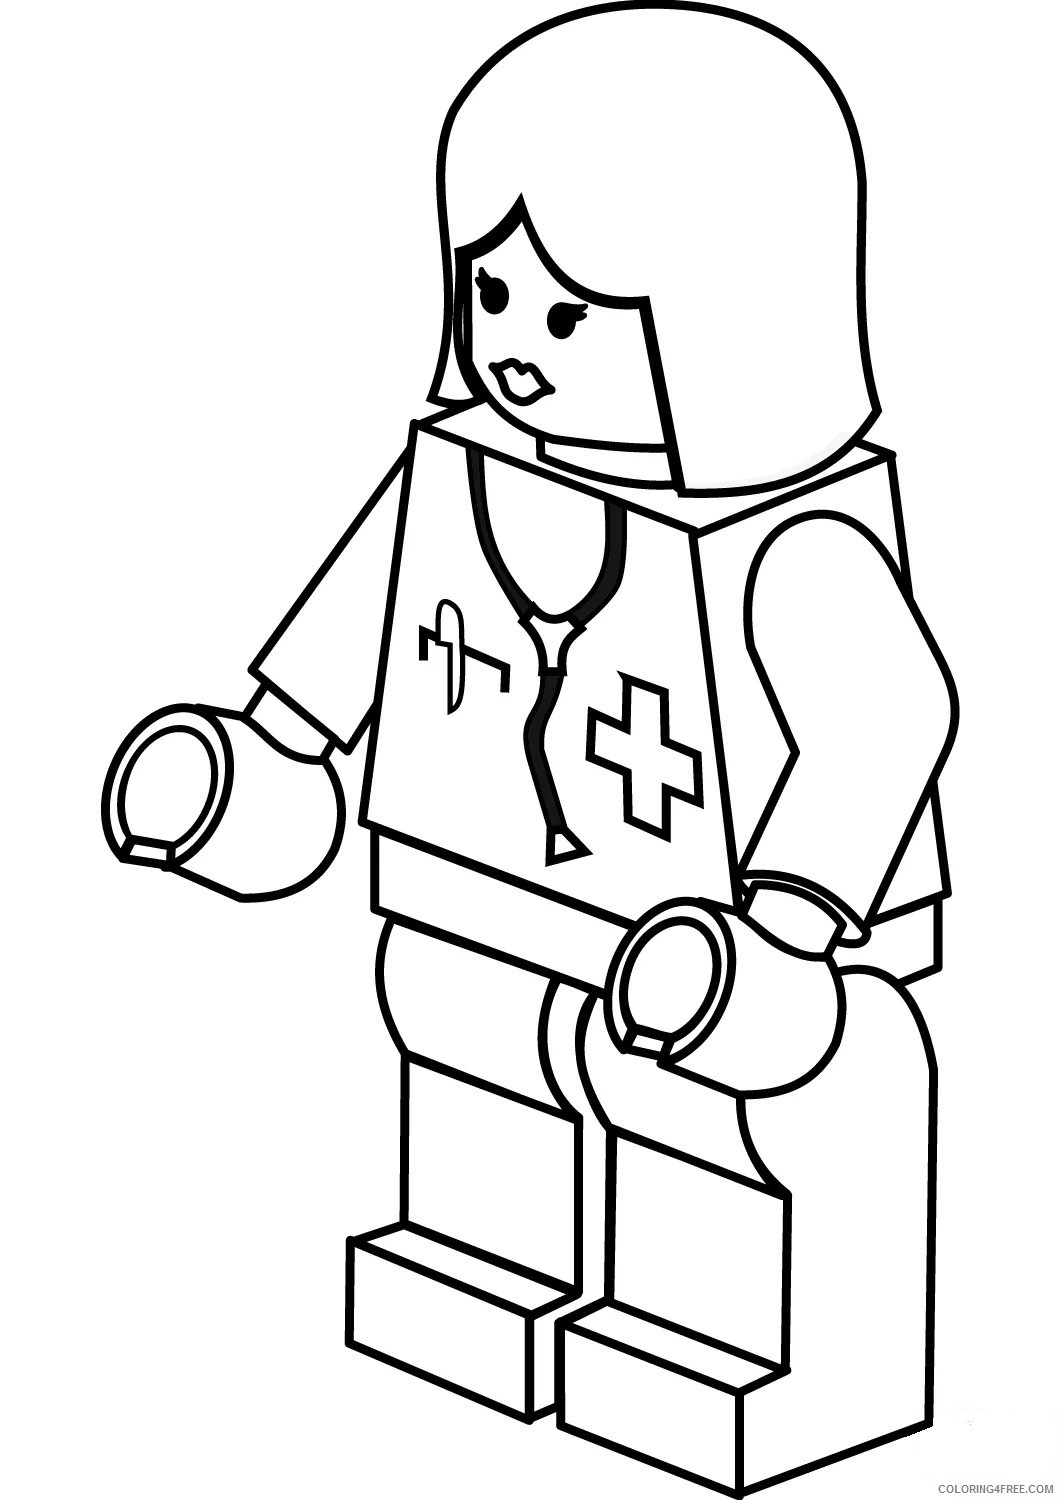 LEGO Coloring Pages Cartoons 1545464427_cool doctor for preschool lego lady free in Printable 2020 3627 Coloring4free